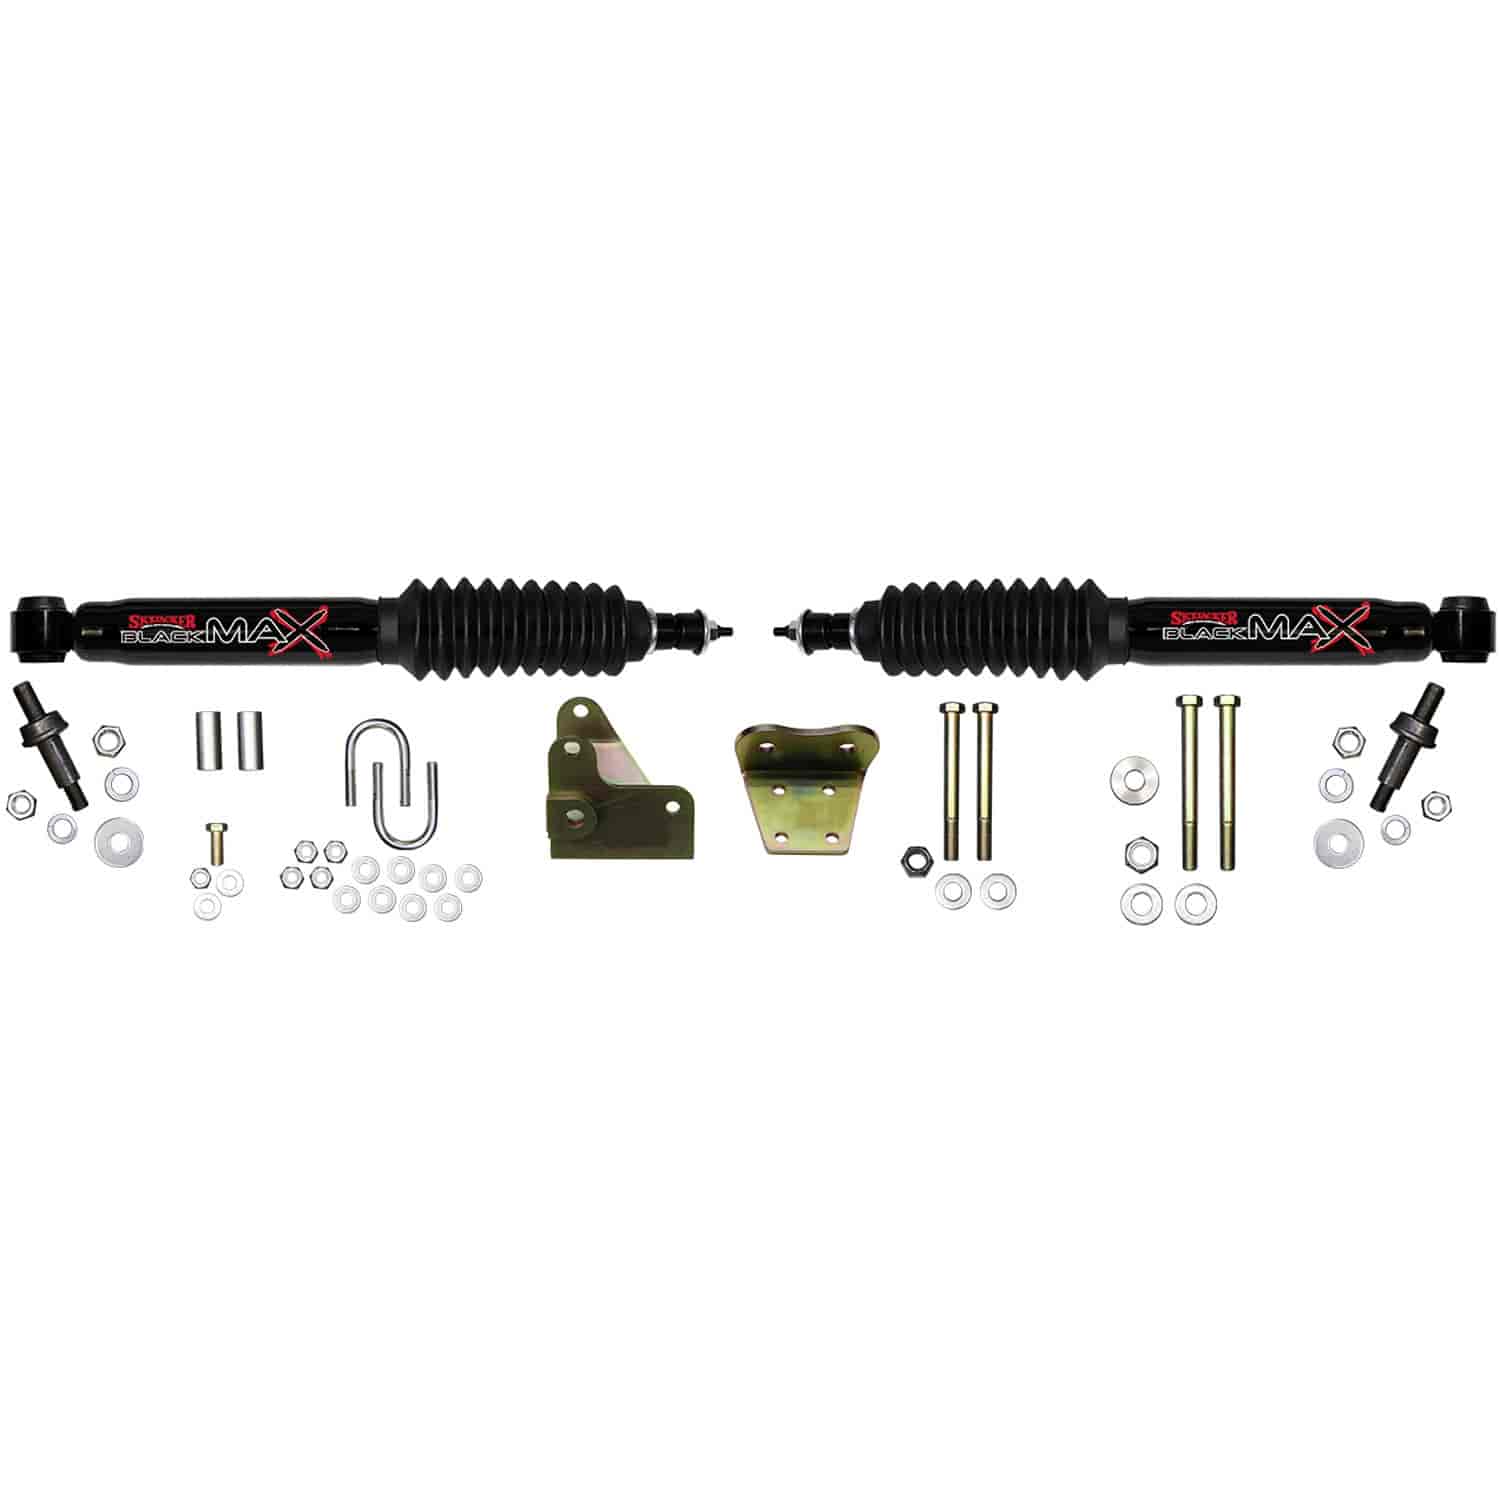 Dual Black MAX Stabilizer 1997-2003 for F-150 4WD with 6- Lift